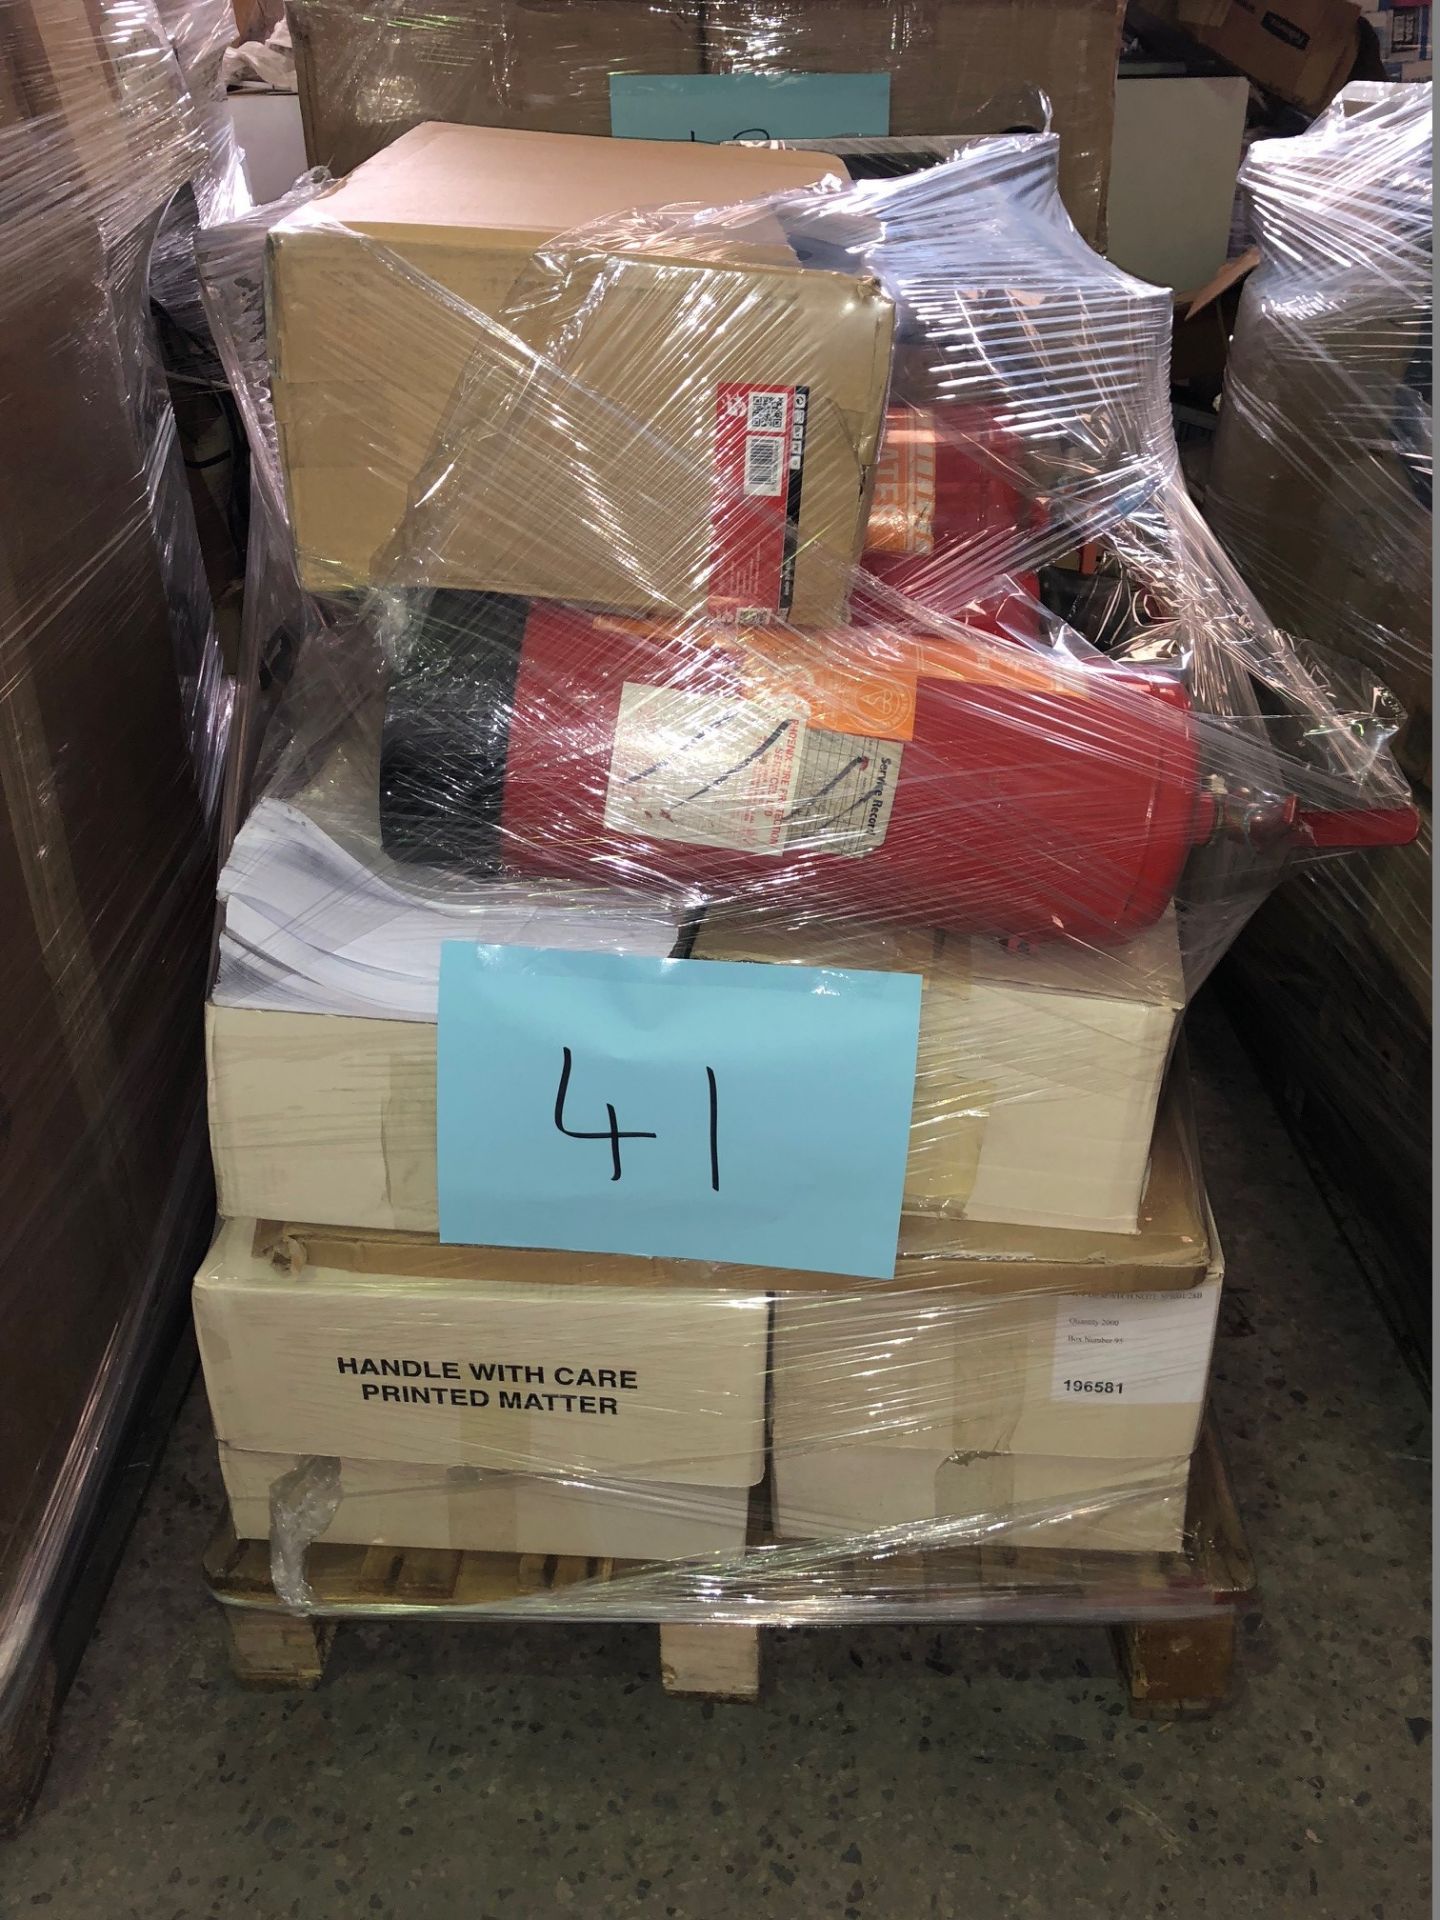 1 x Pallet of Mixed Stock/Stationery Including Paper, Lever Arch Files, Fire Extinguishers, Small